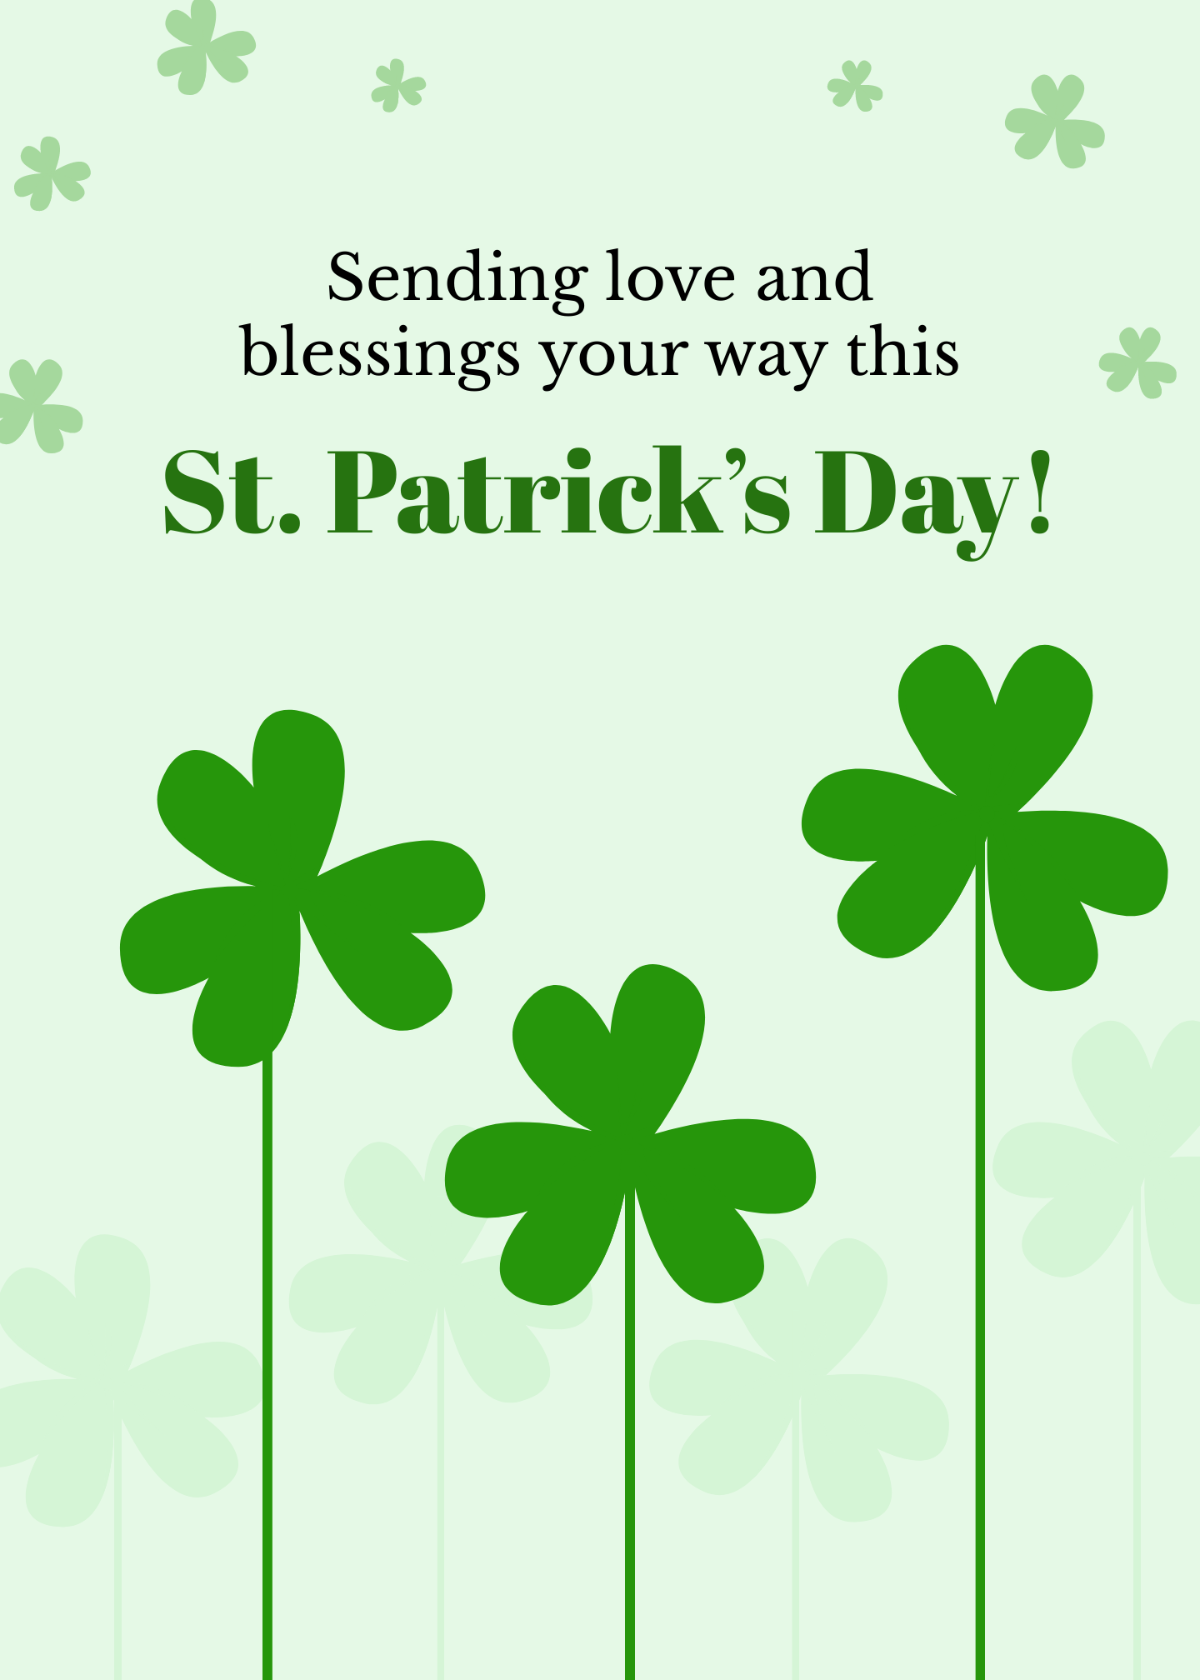 Free St. Patrick's Day Wishes Template